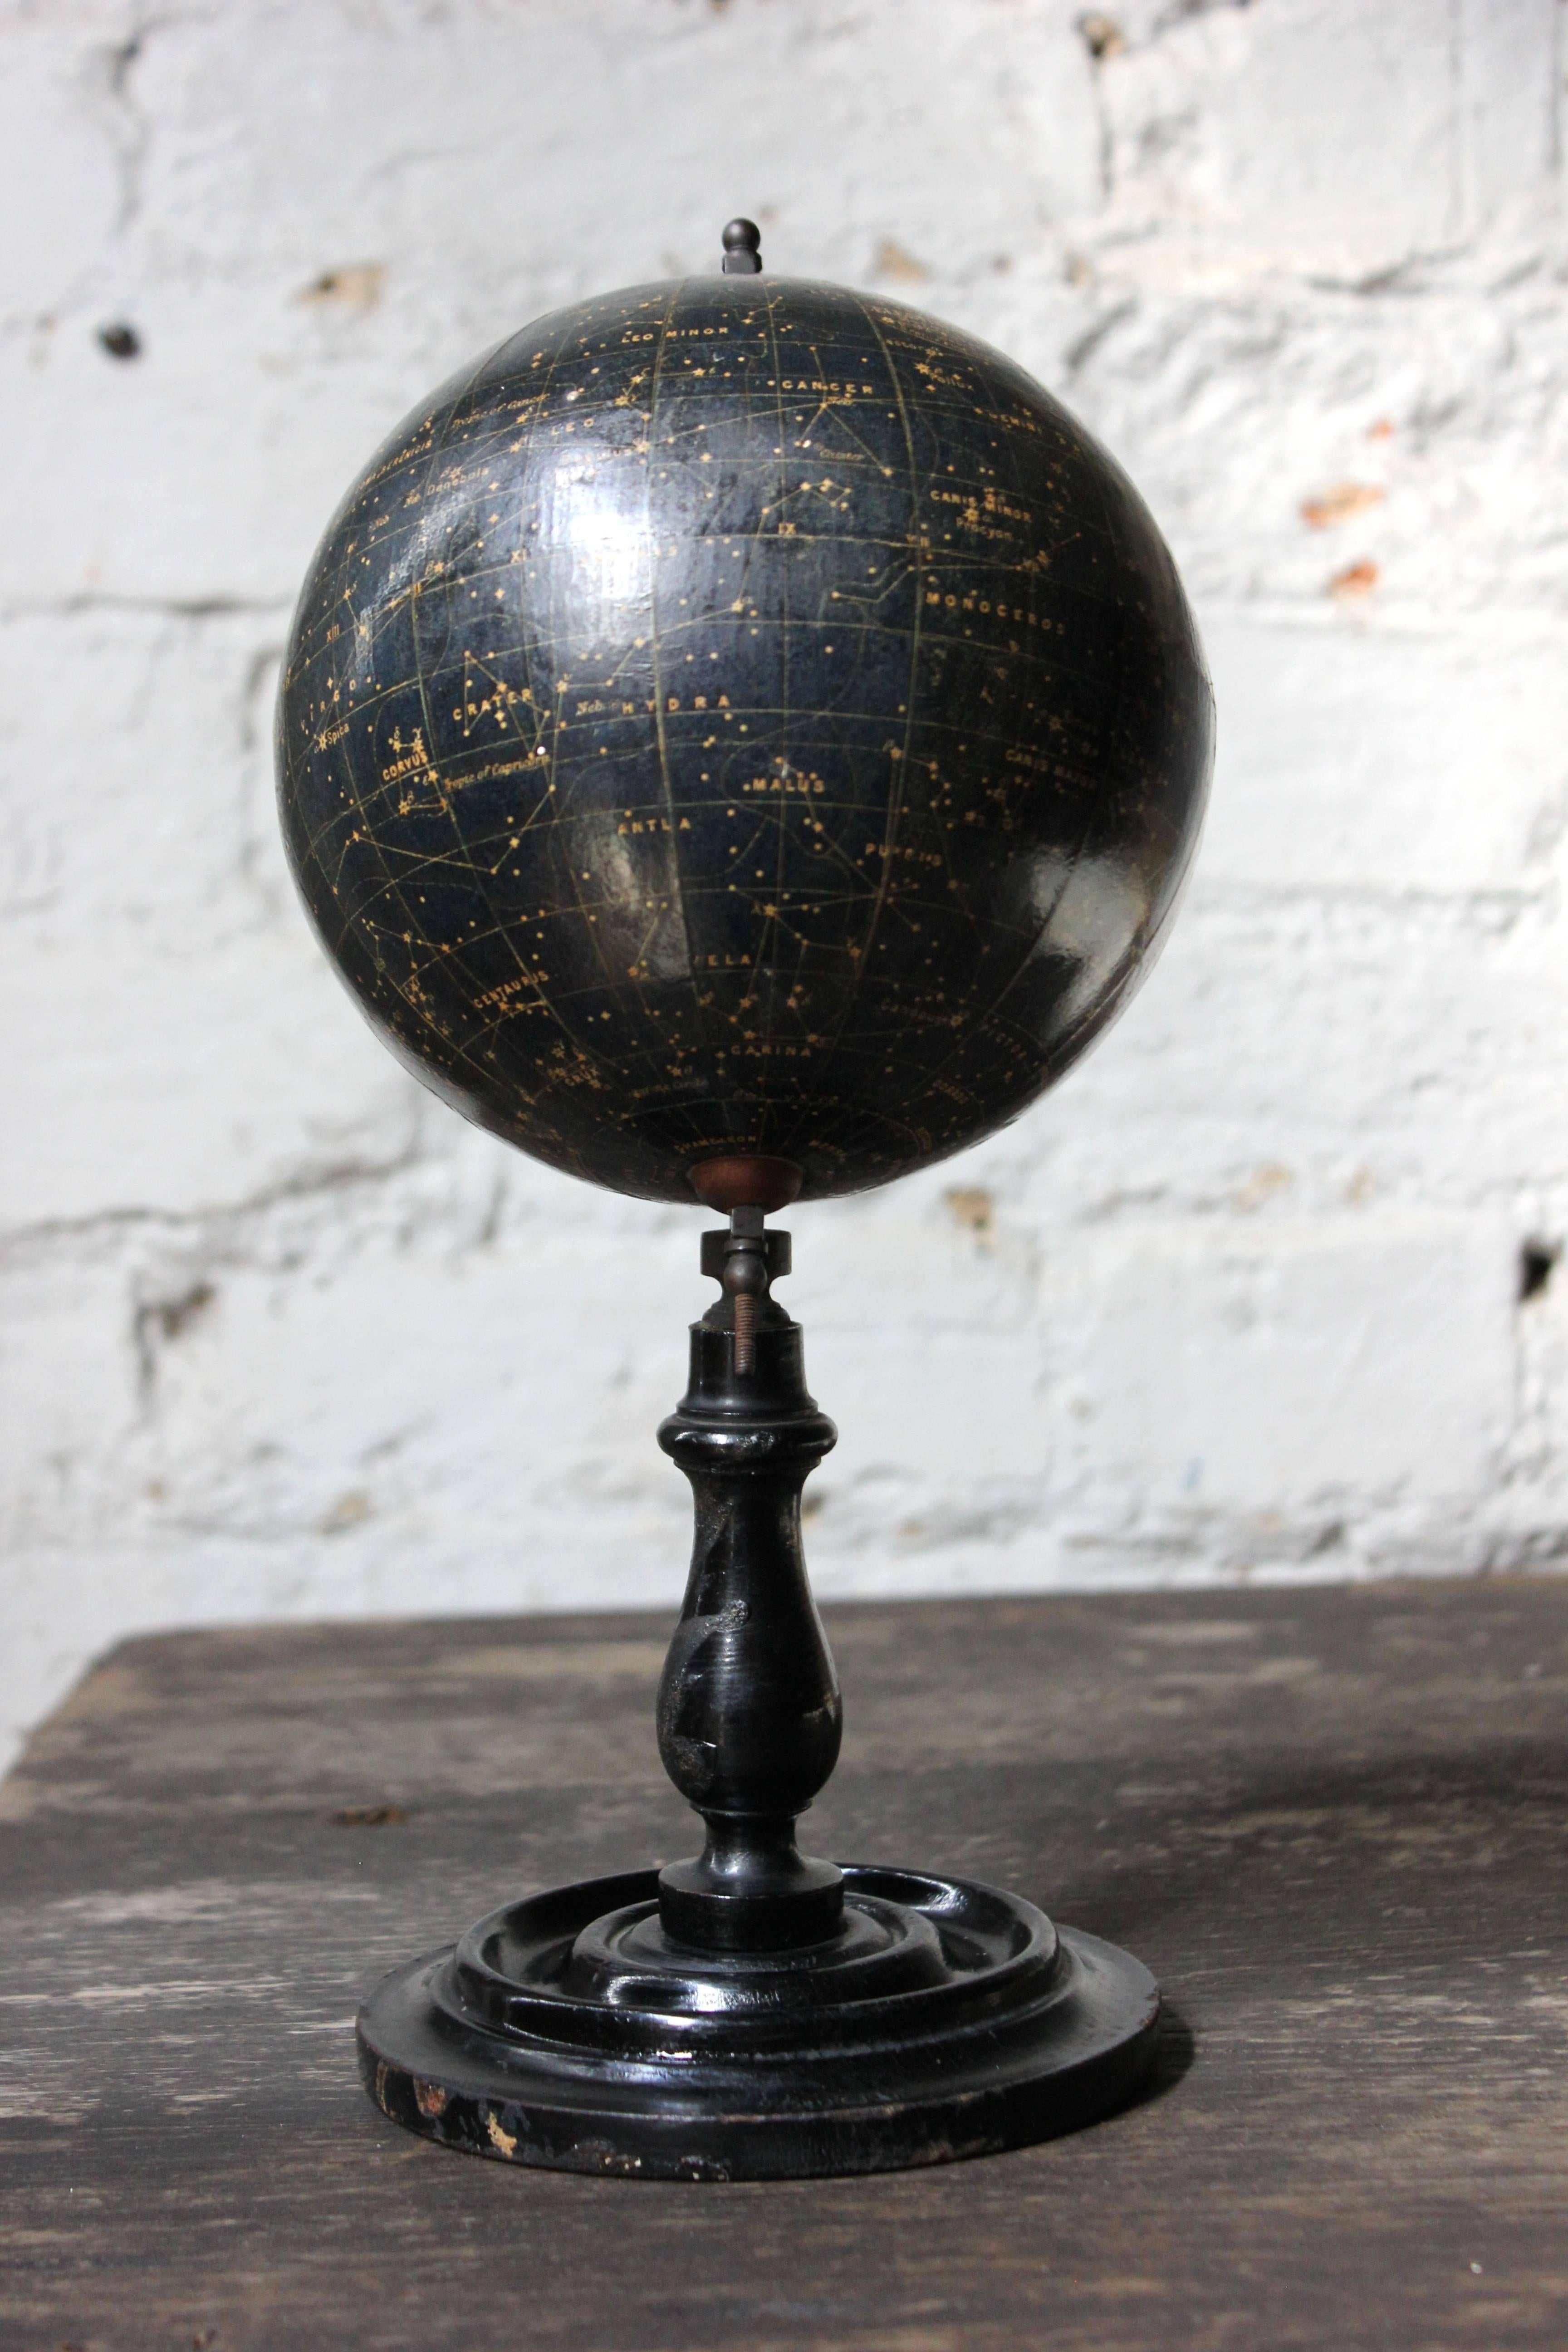 Paper Early 20th Century Table Globe by G Philip & Son, London, circa 1910-1915